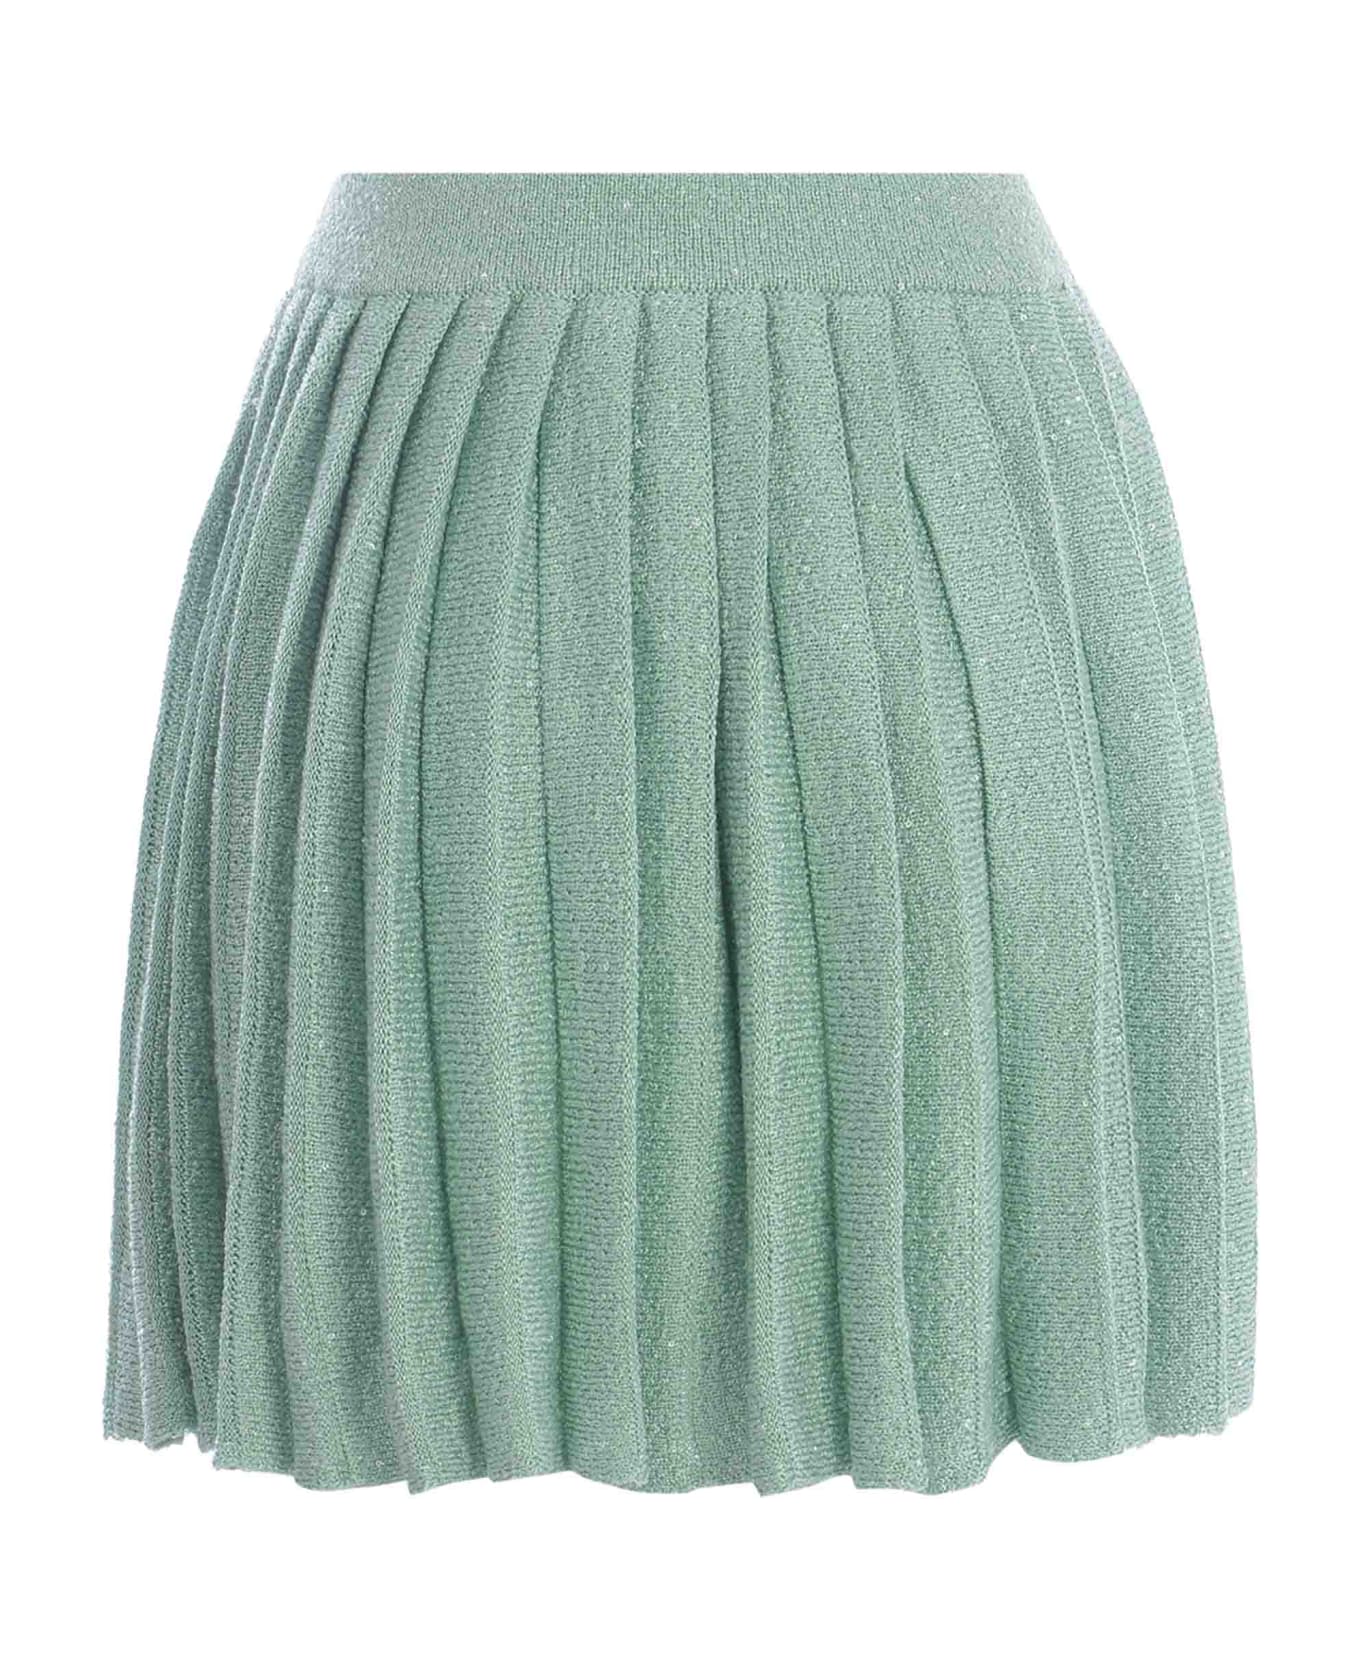 self-portrait Skirt Self-portrait "pailettes" Made Of Knitted Fabric - Verde menta